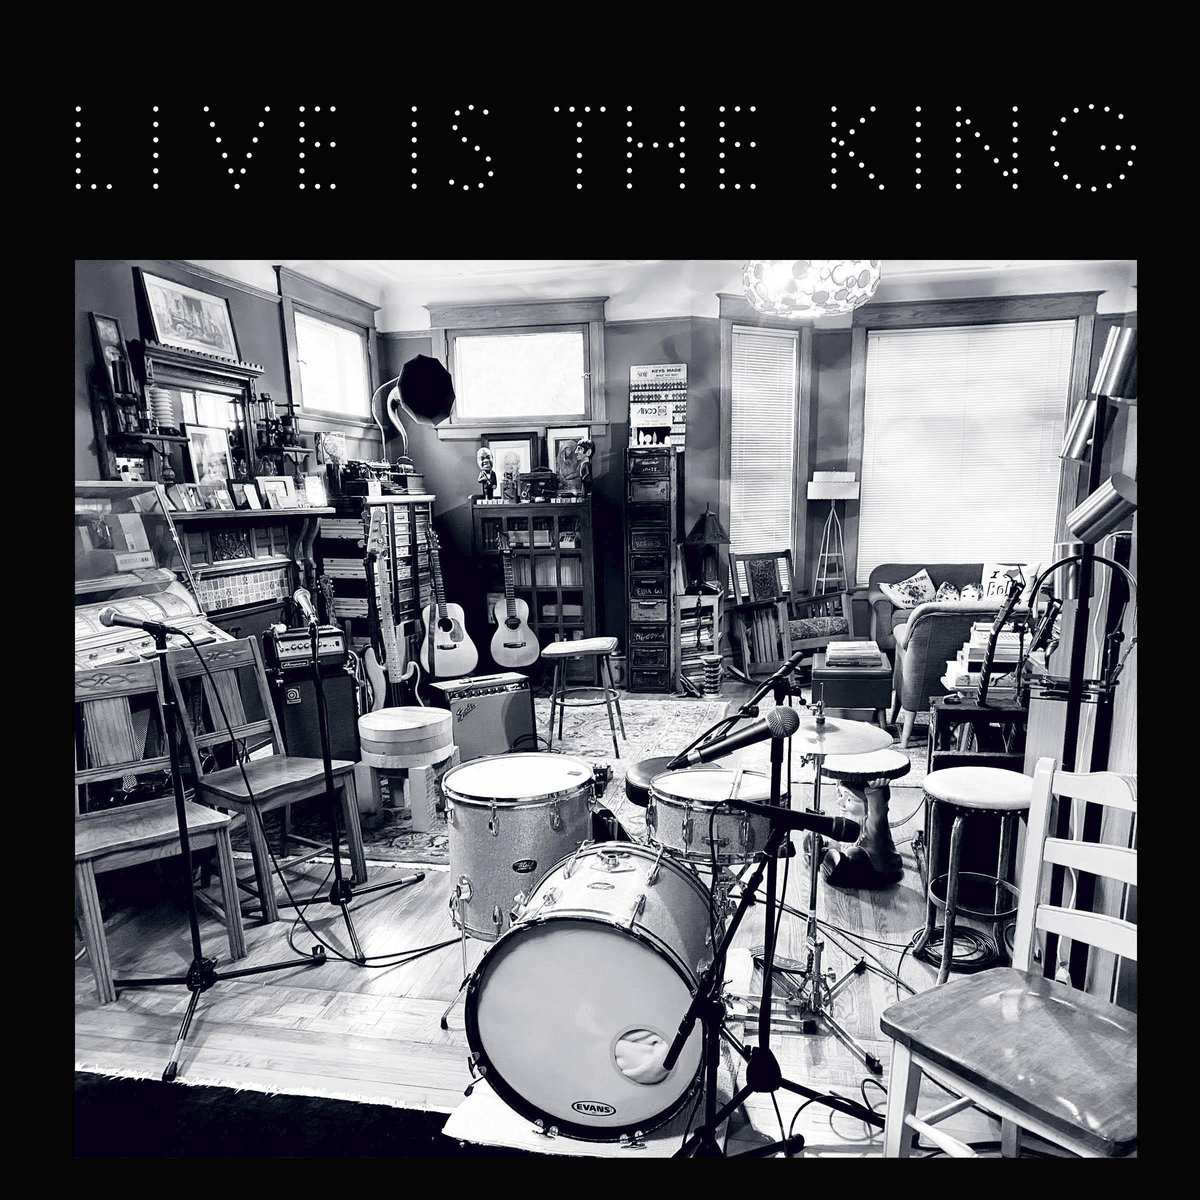 Live Is The King album art